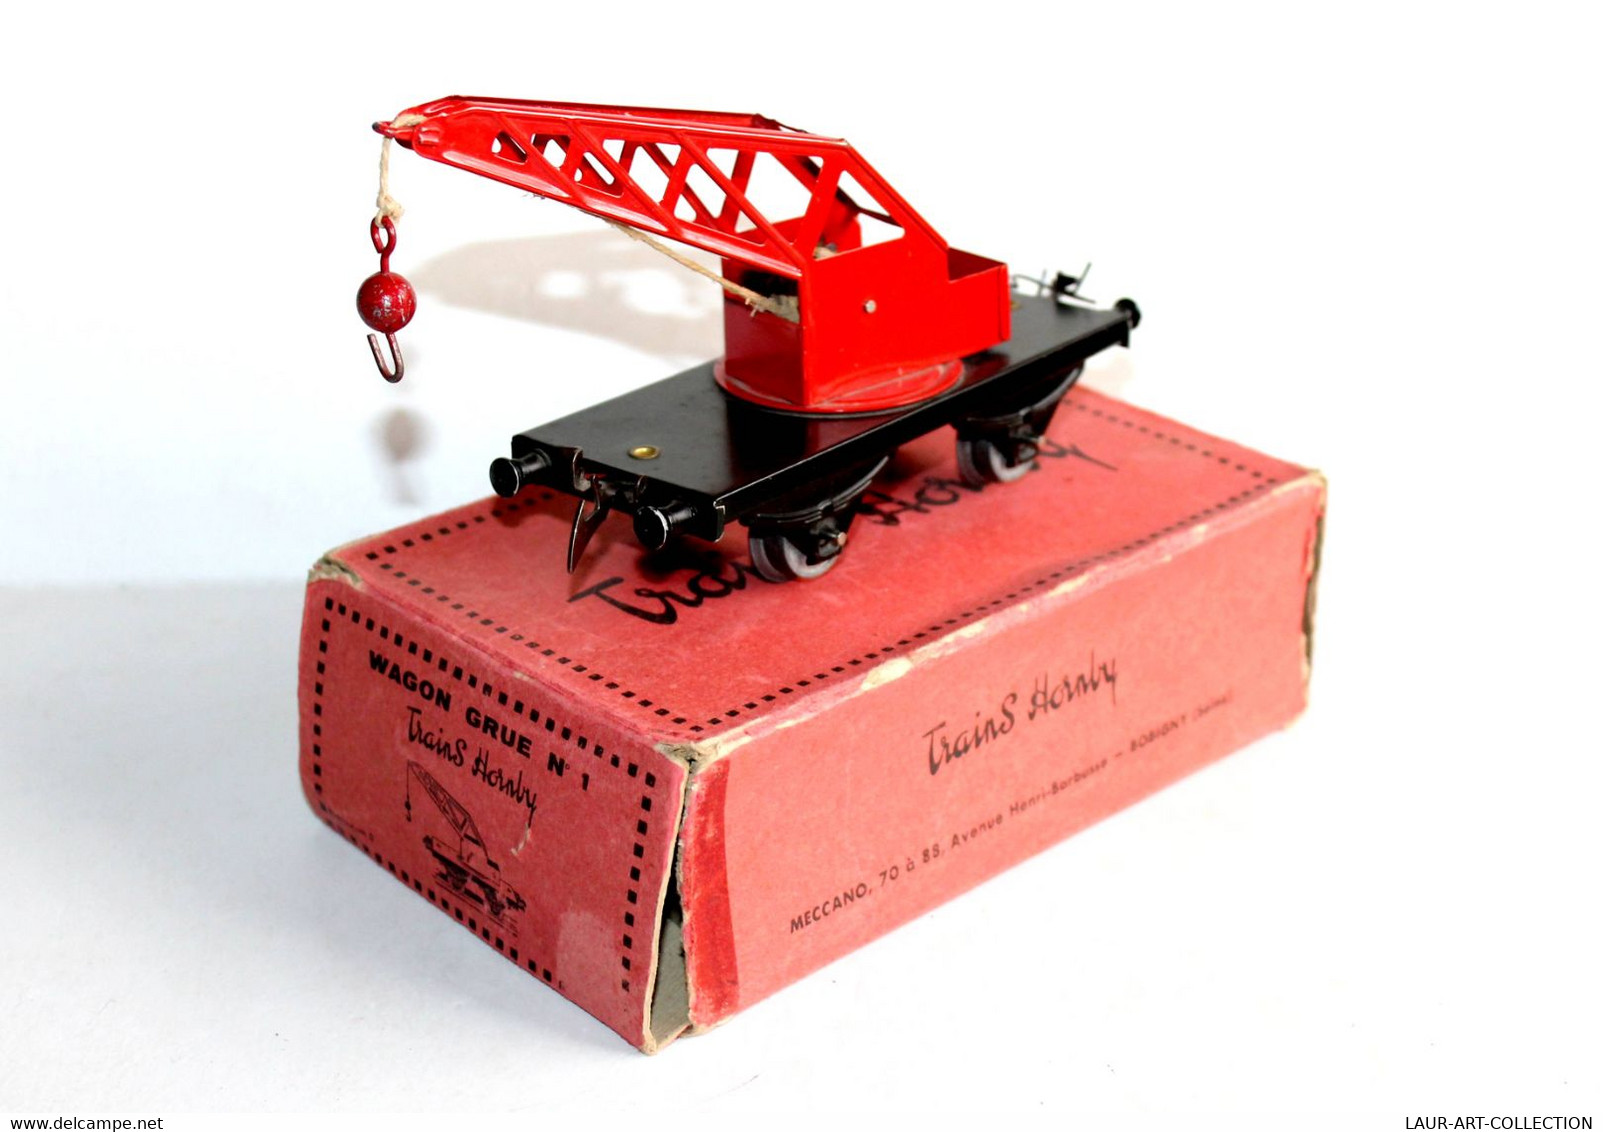 HORNBY - WAGON GRUE N°1 TREUIL, A POULIE PALAN LEVAGE, A ESSIEUX ECH:O MINIATURE - MODELISME FERROVIAIRE (2811.48) - Goods Waggons (wagons)